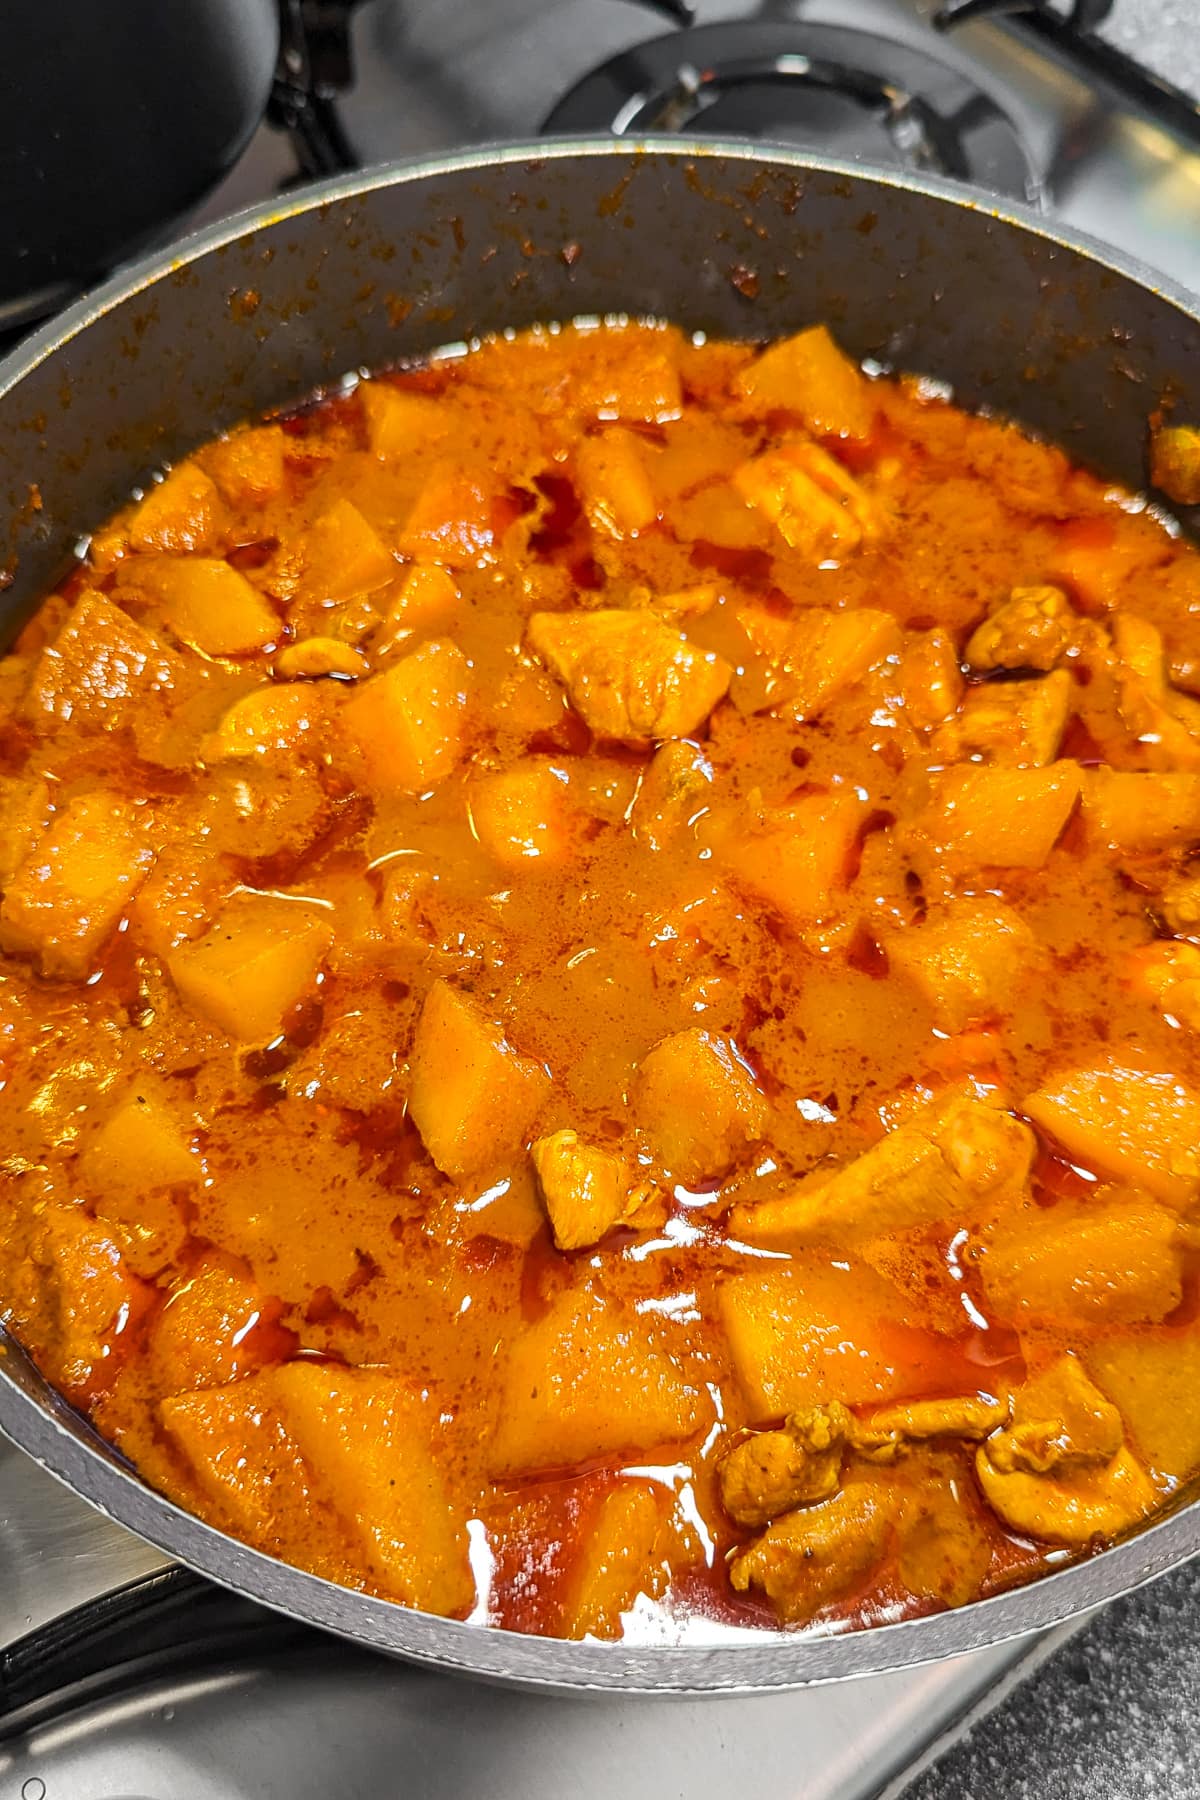 Pumpkin curry in a pan on the stove.